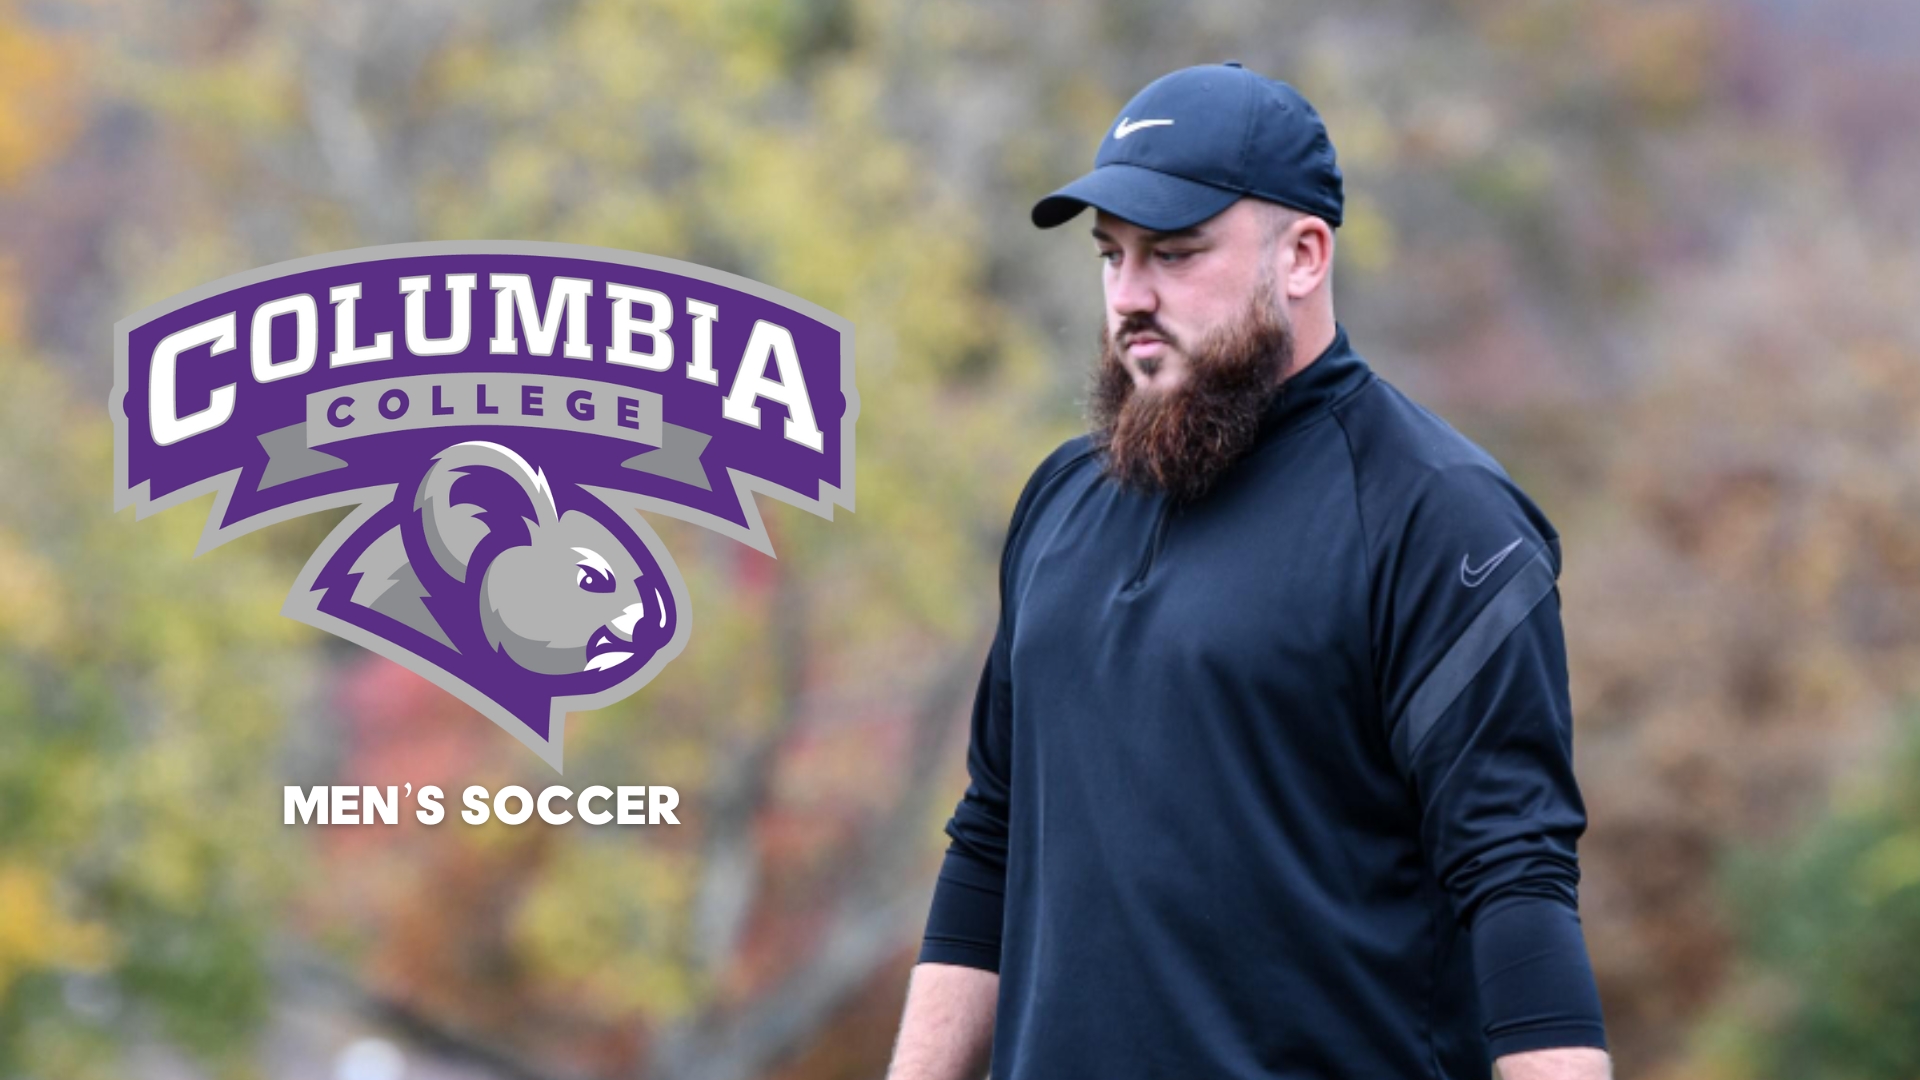 Columbia College Names Jack Smith as Second Head Coach in Men's Soccer Program History